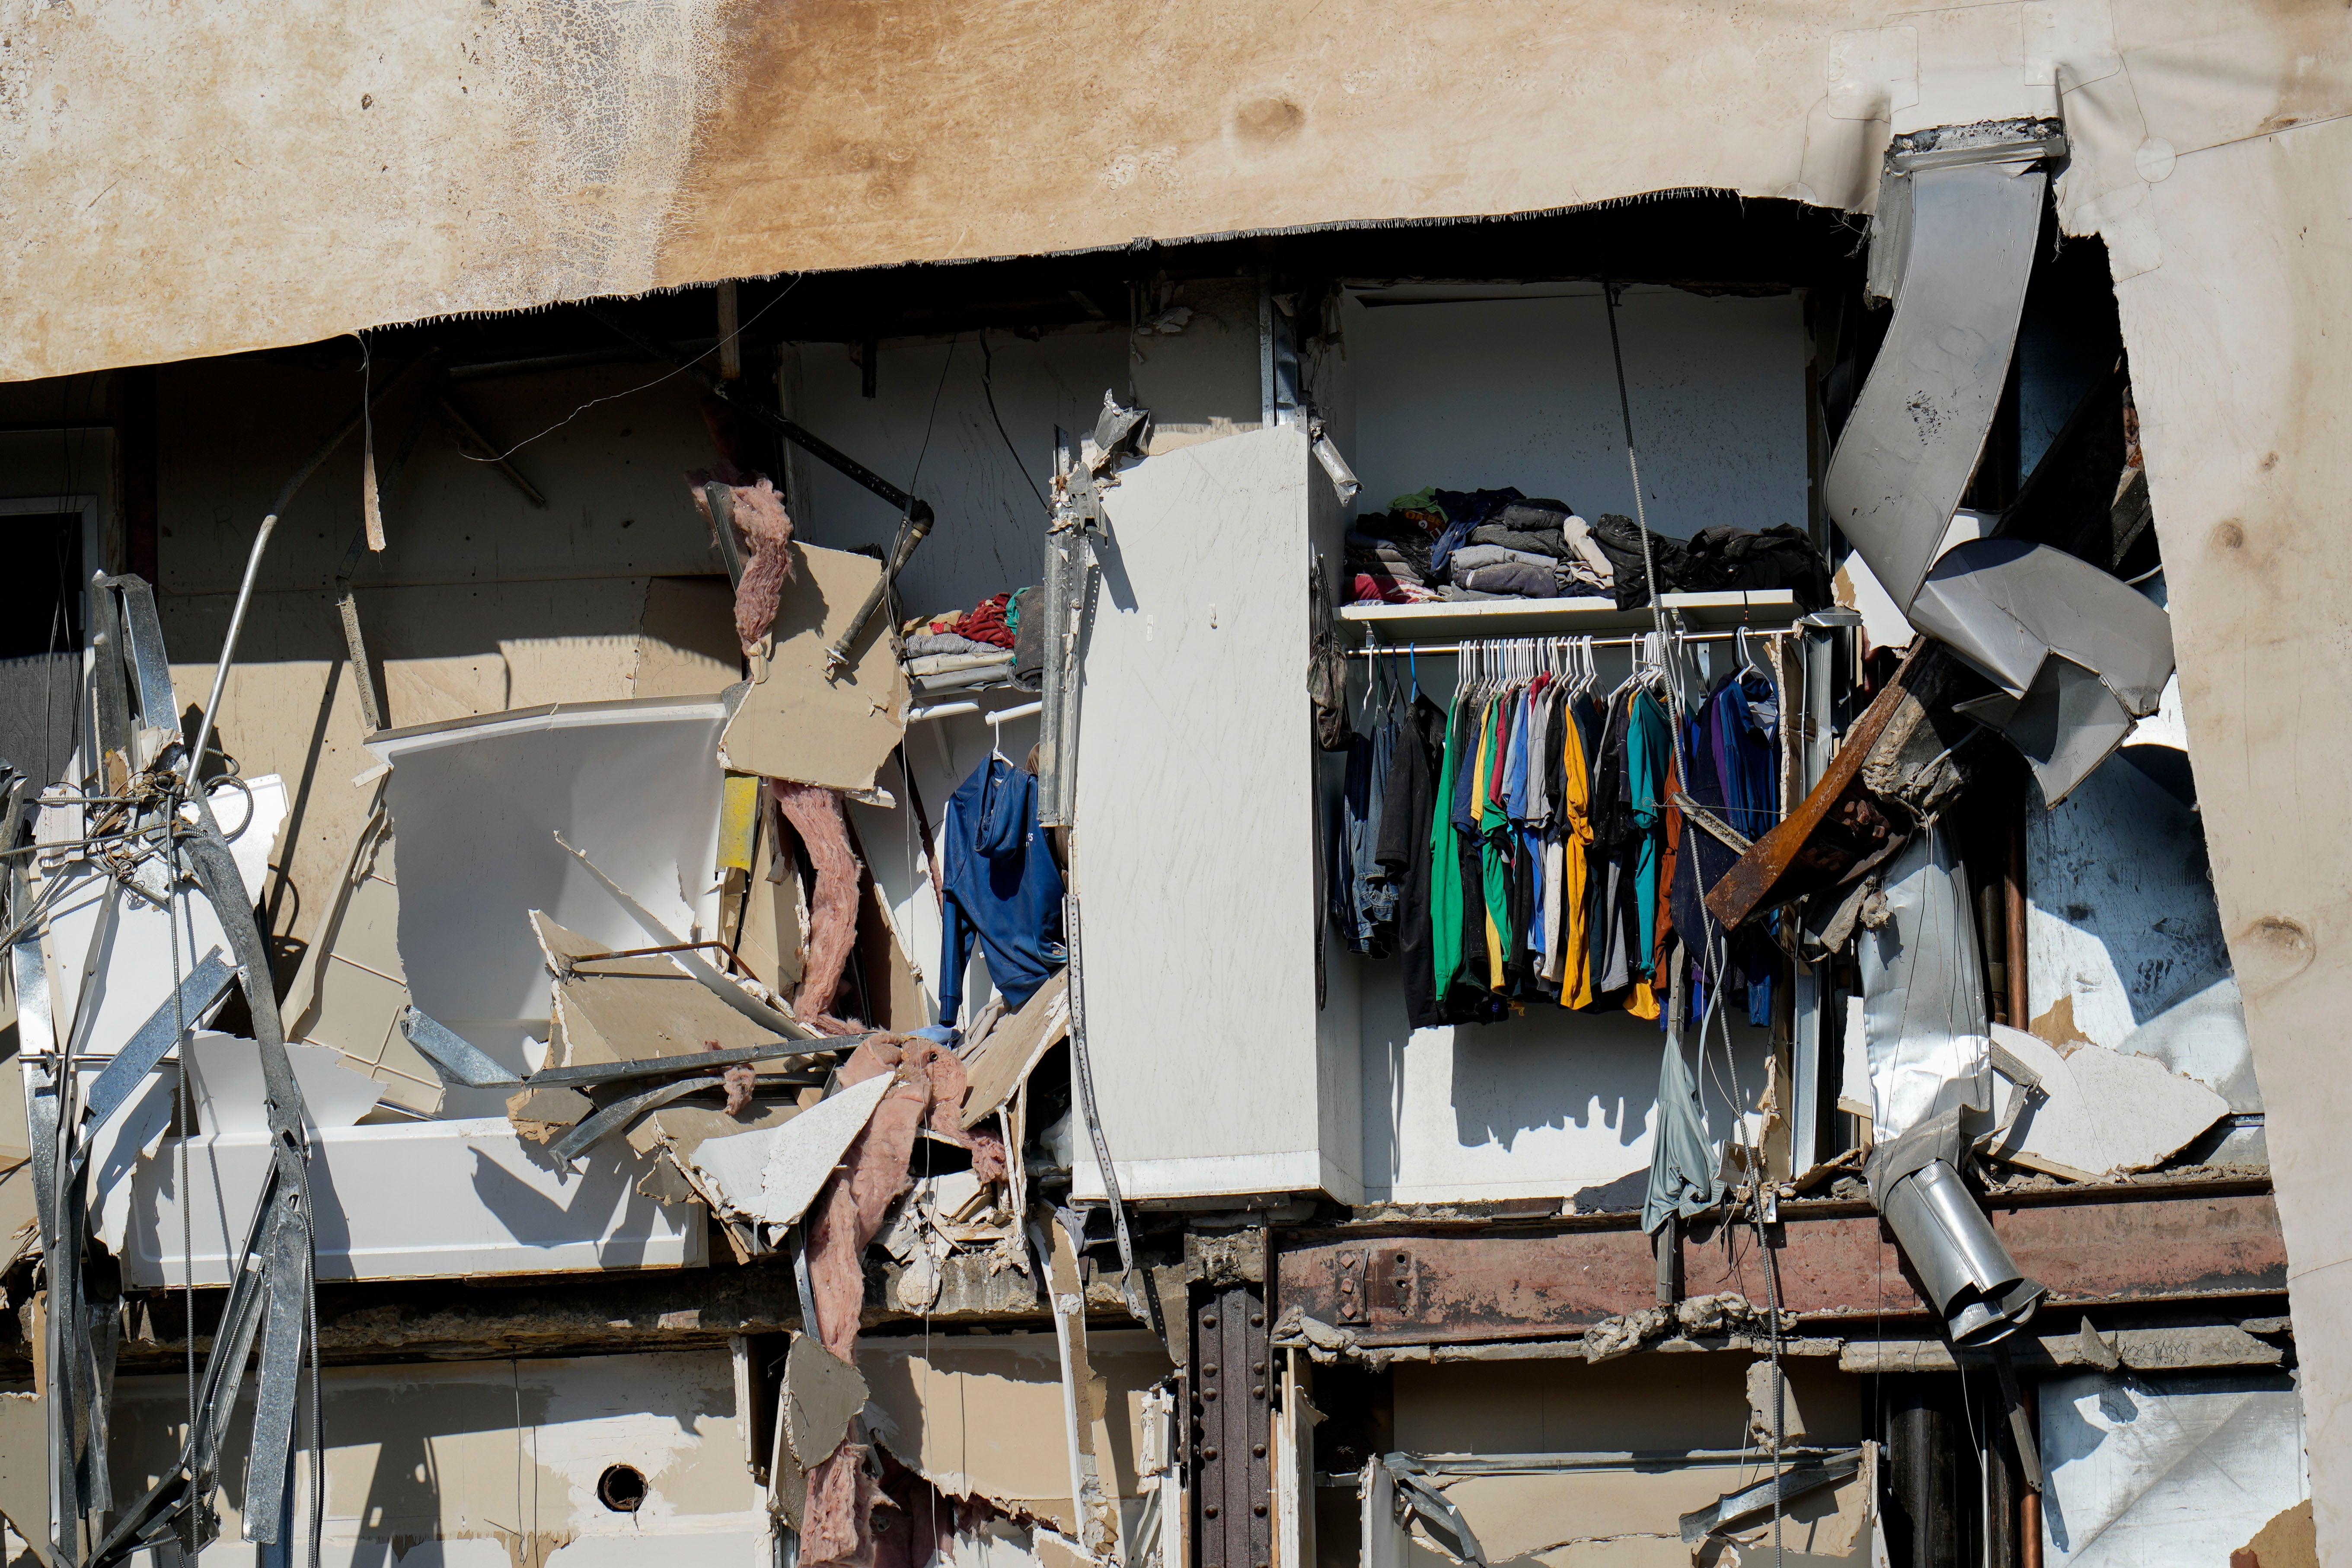 Clothing hanging in an apartment building that partially collapsed on Sunday afternoon can be seen Tuesday, May 30